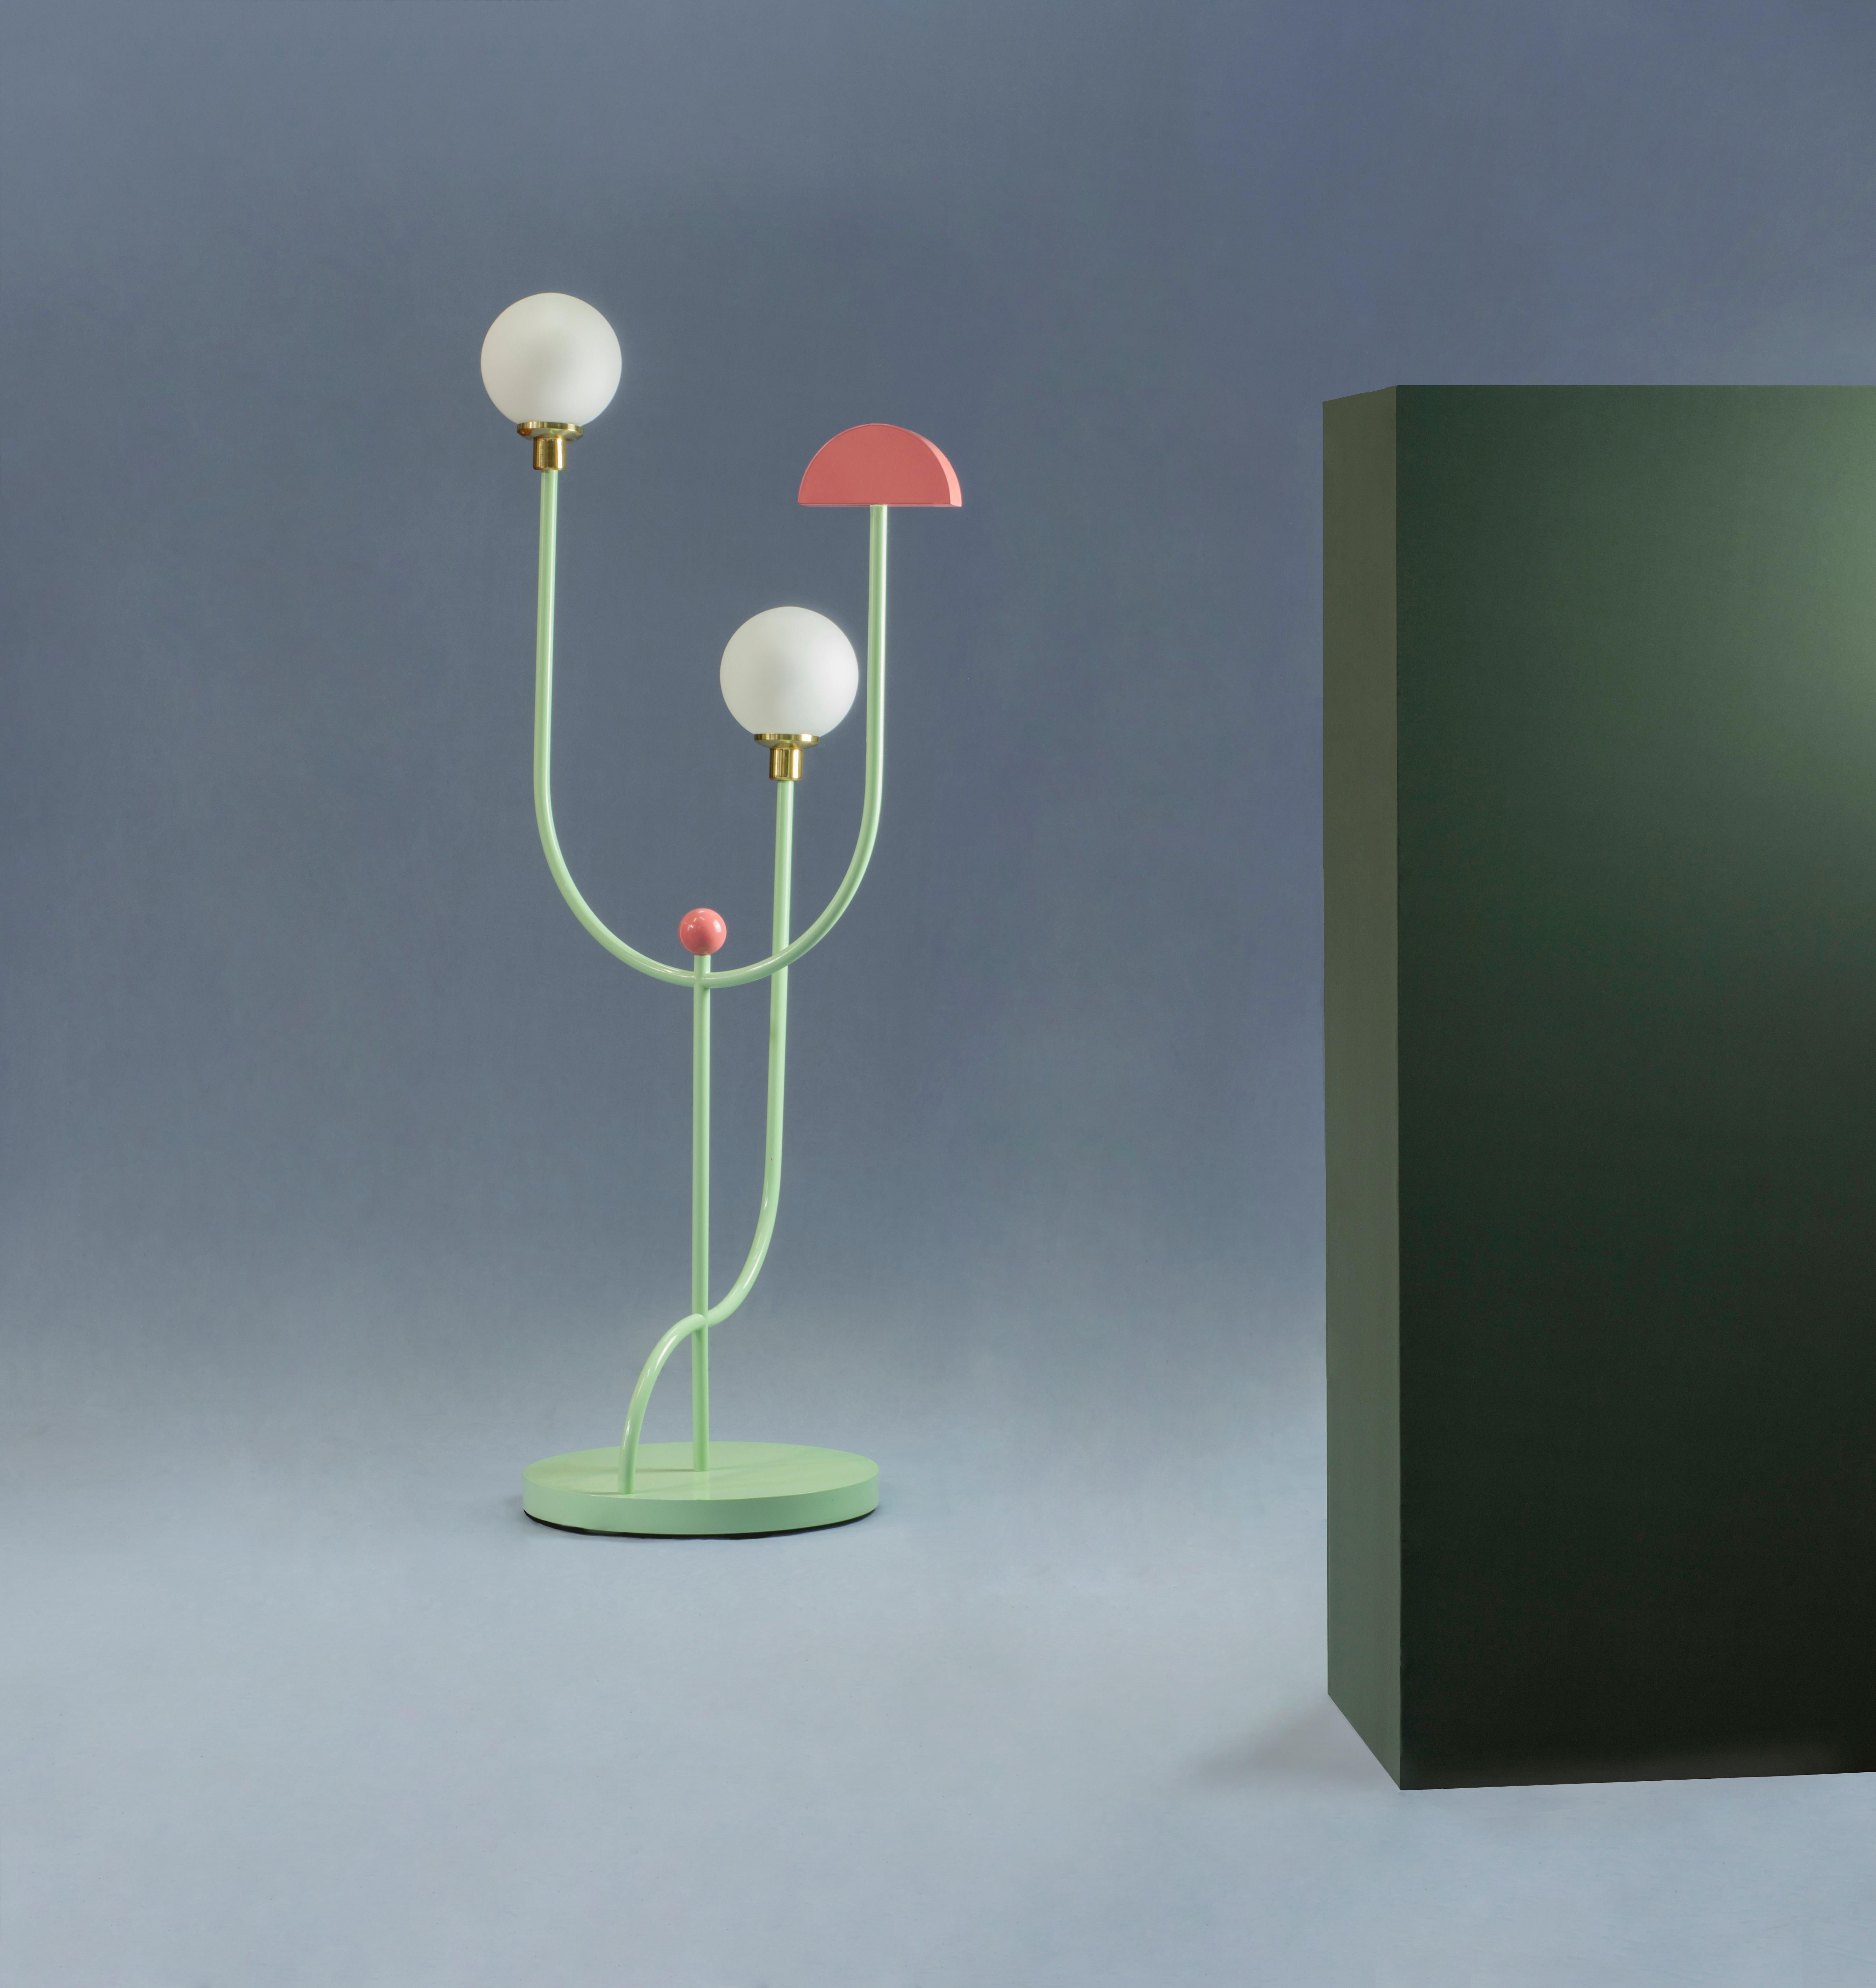 The SPACE floor lamp is one of the pieces designed by Sergio Prieto, a Spanish designer prized as 